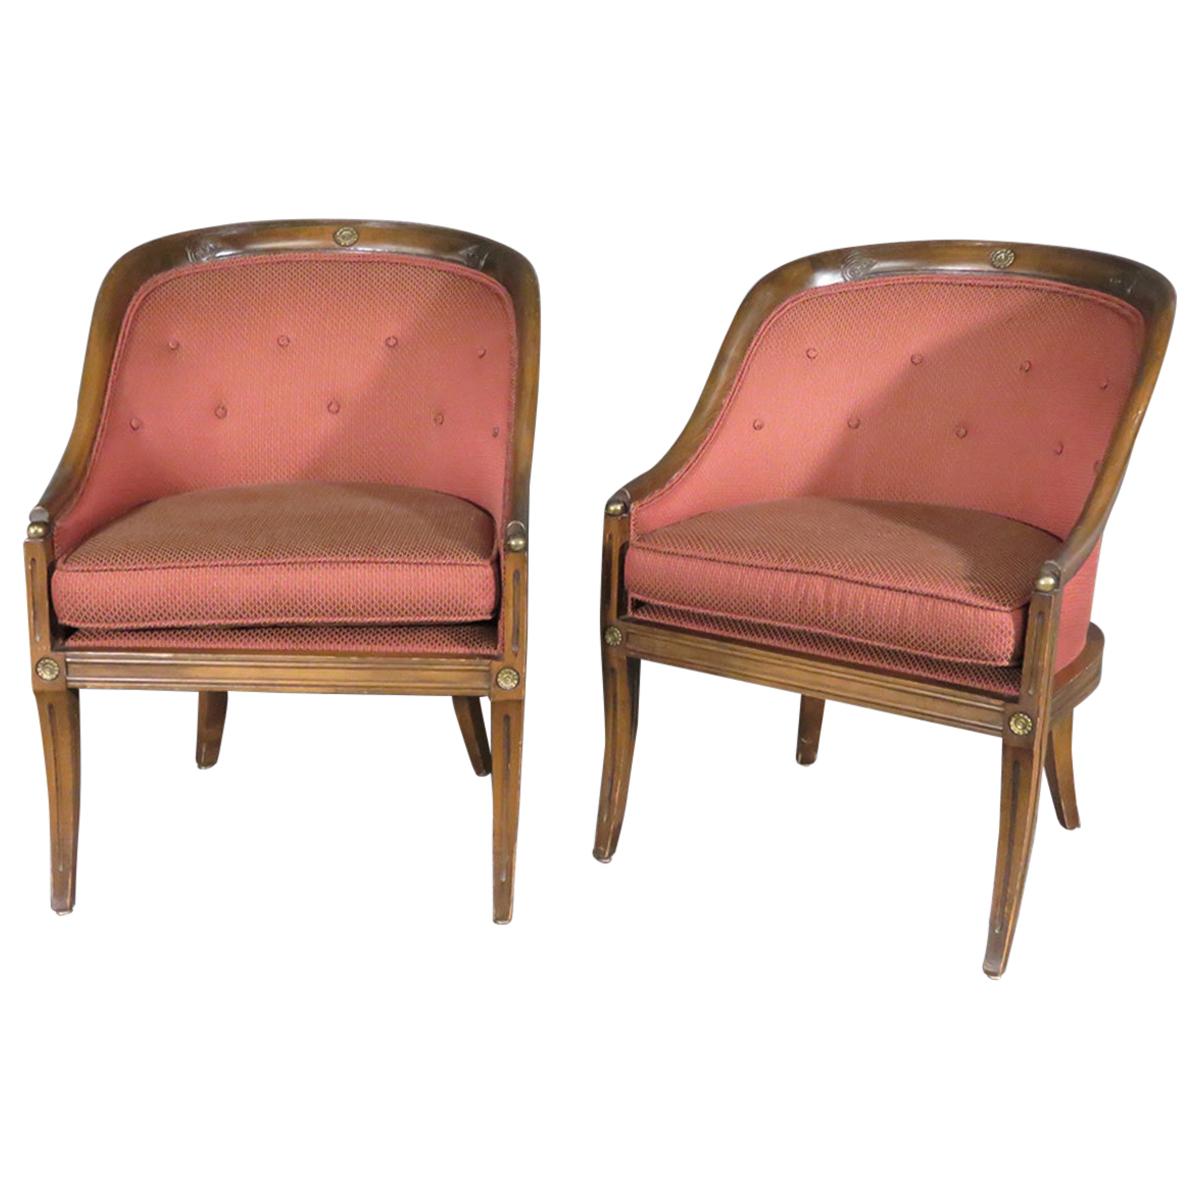 Great Pair of French Regency Walnut Tub Style Lounge Club Chairs, circa 1940s